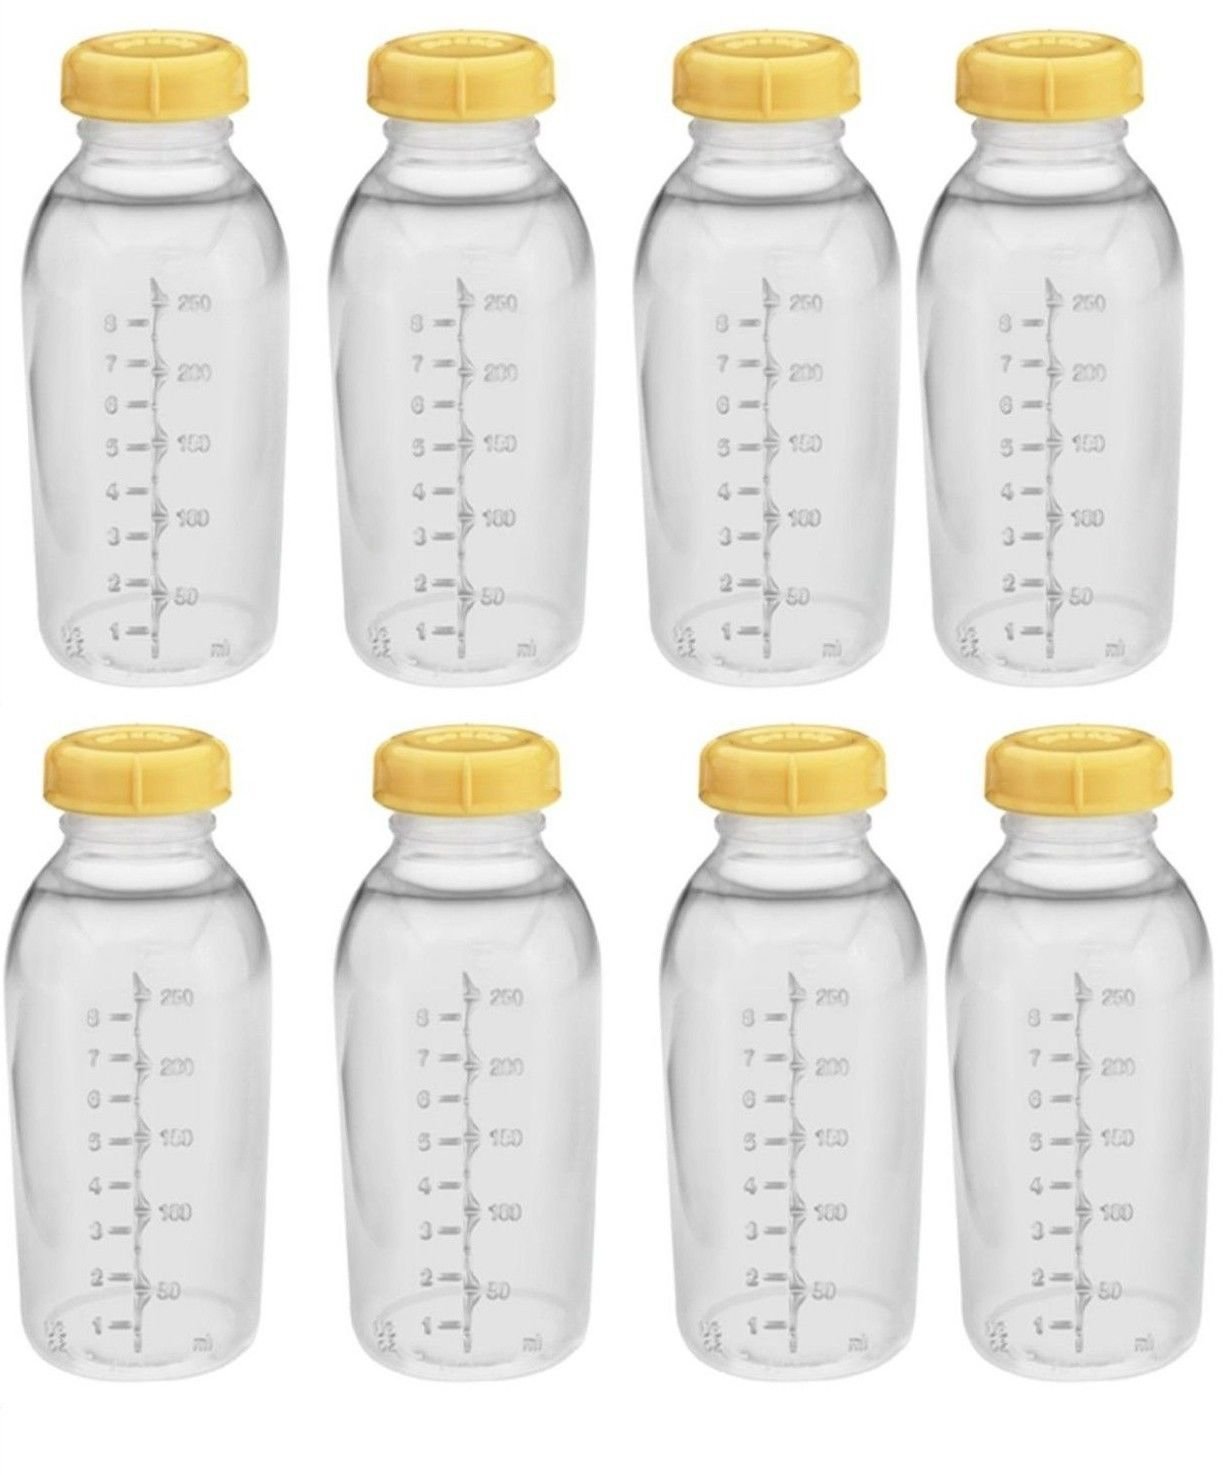 Book Cover Medela Breastmilk Collection Storage Feeding Bottle with Lids-8 Pack (8 Bottles and 8 Lids)w/lid 8oz /250ml